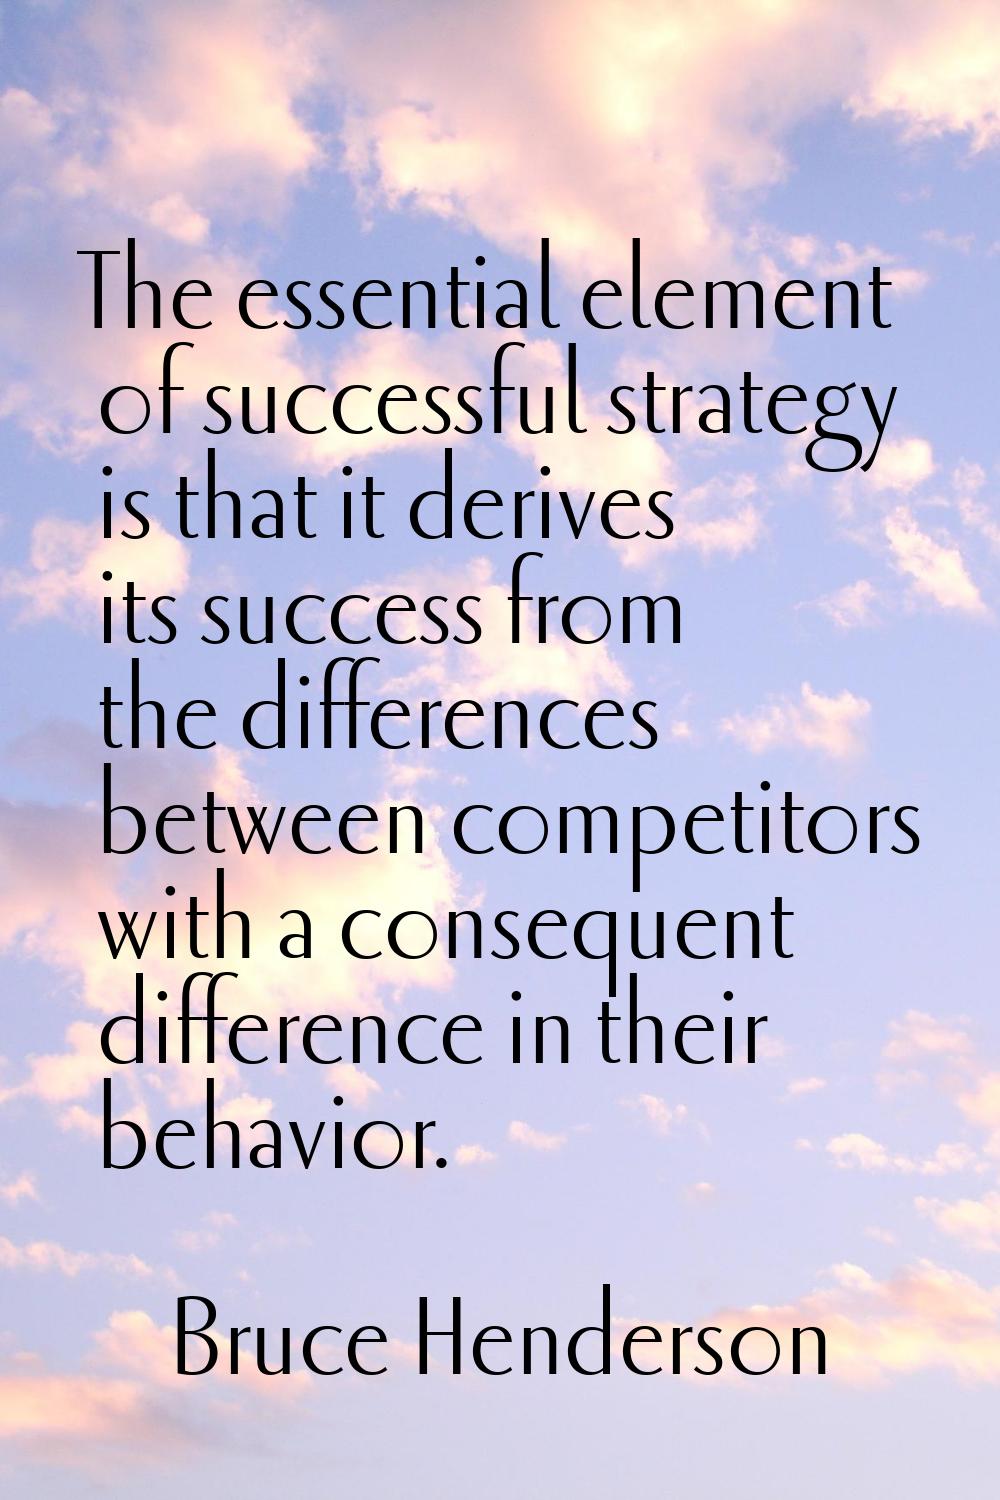 The essential element of successful strategy is that it derives its success from the differences be